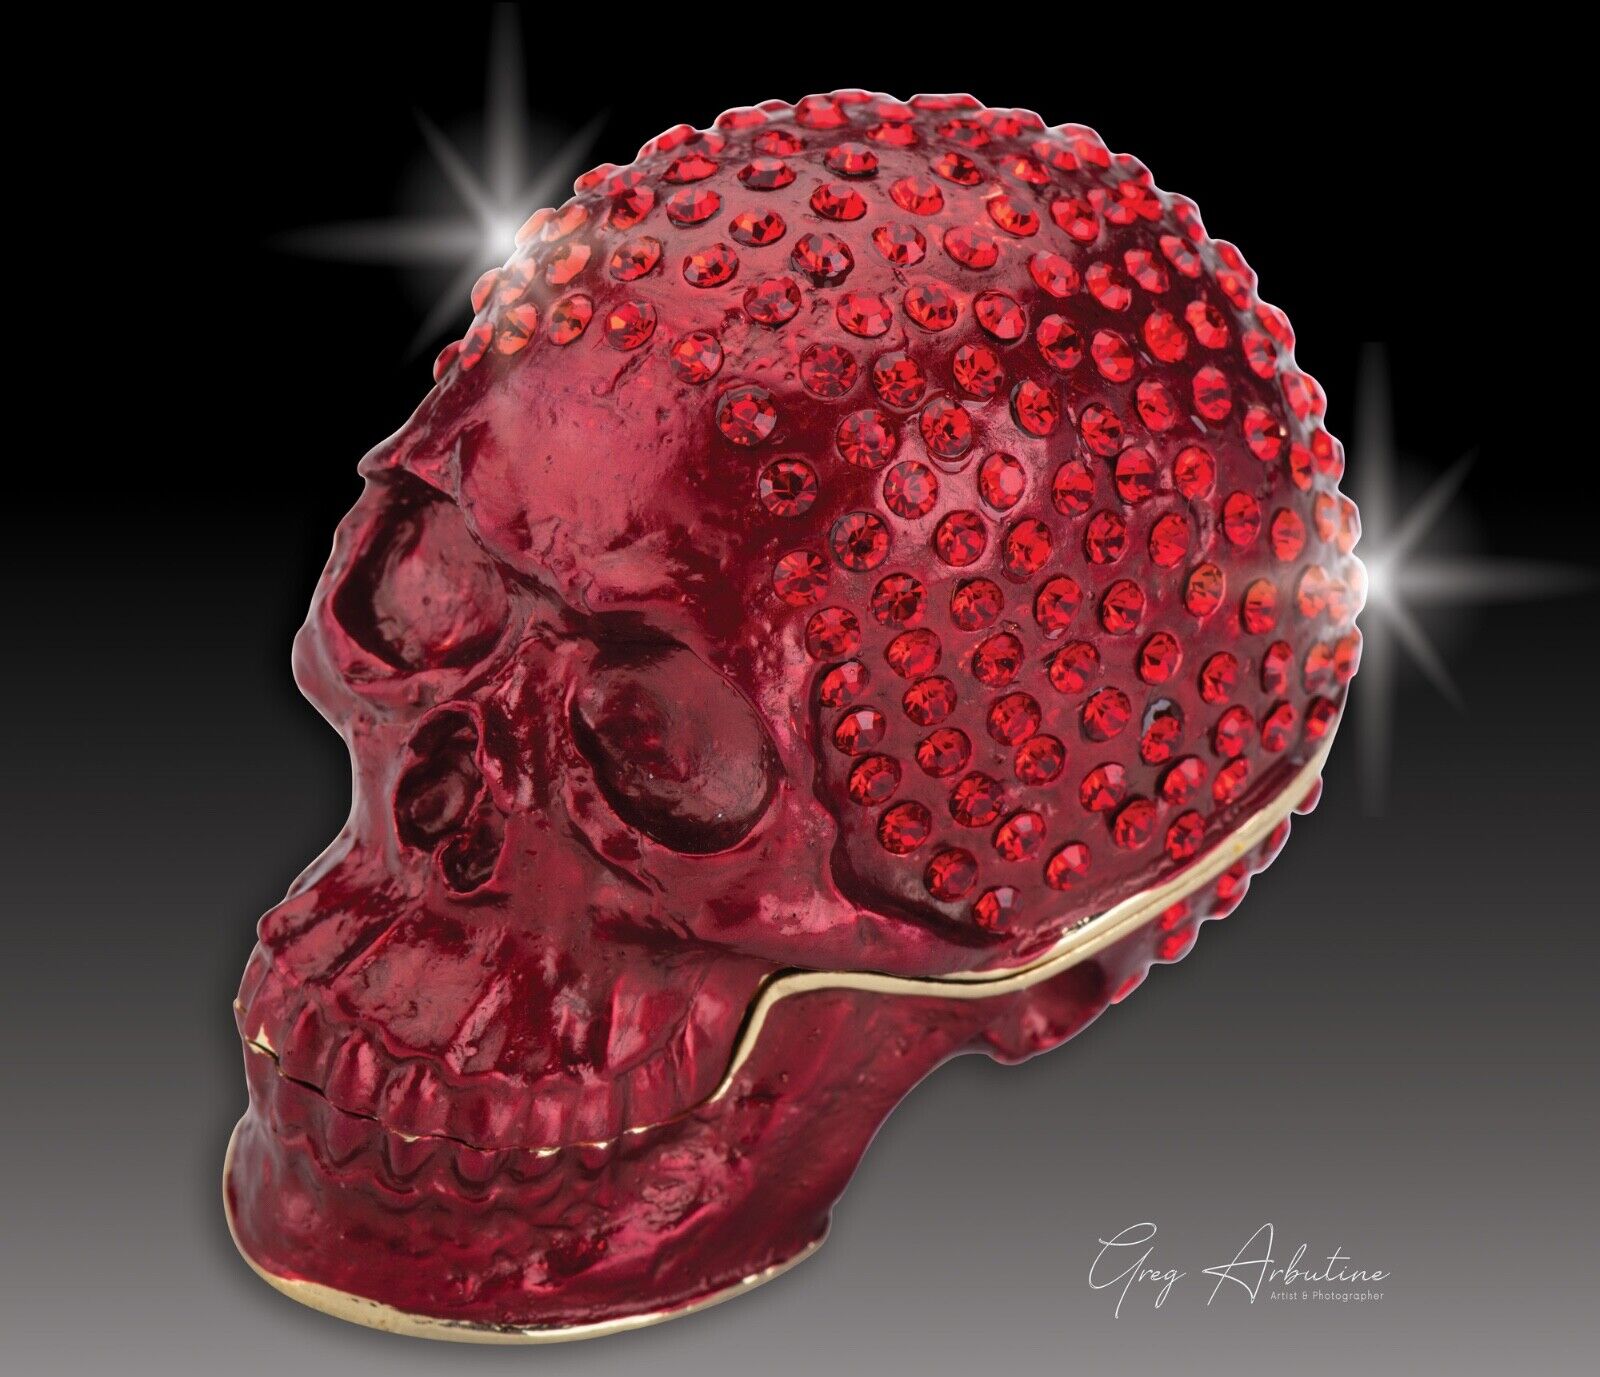 Artist Greg Arbutine Metal Red enameled Skull Box with red colored crystals